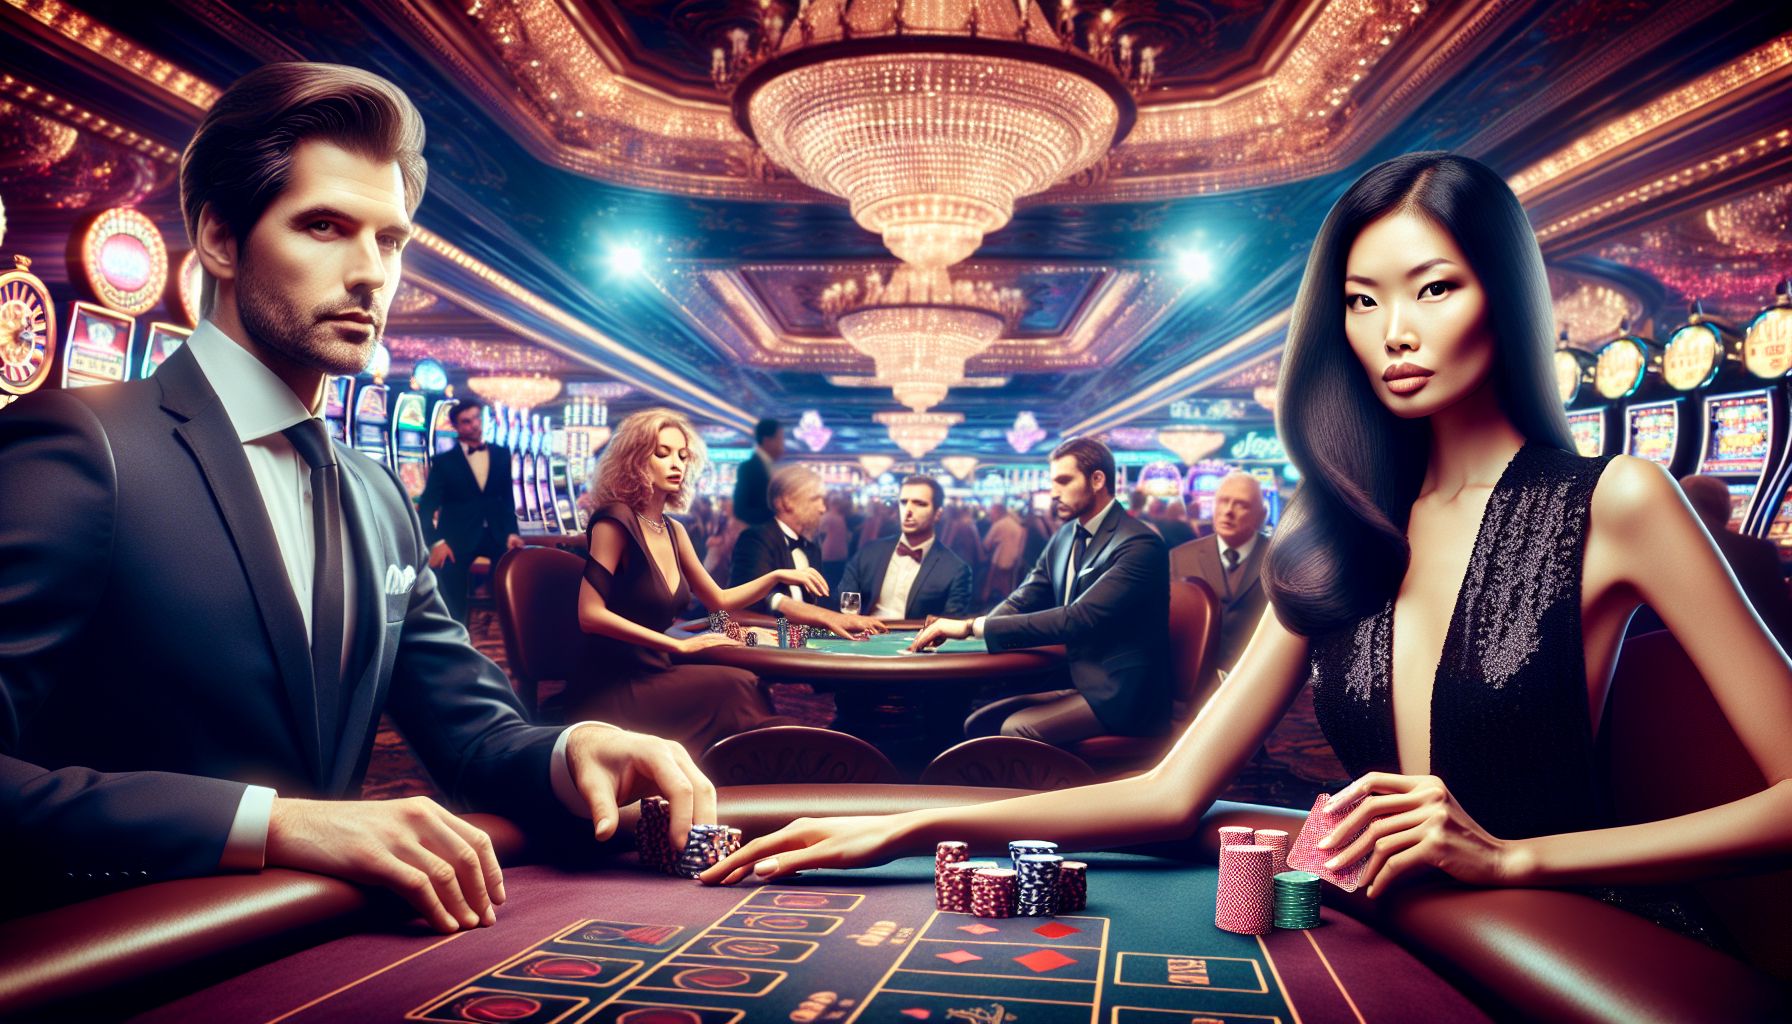 Inside the Casino: A Behind-The-Scenes Look at Professional Poker Games